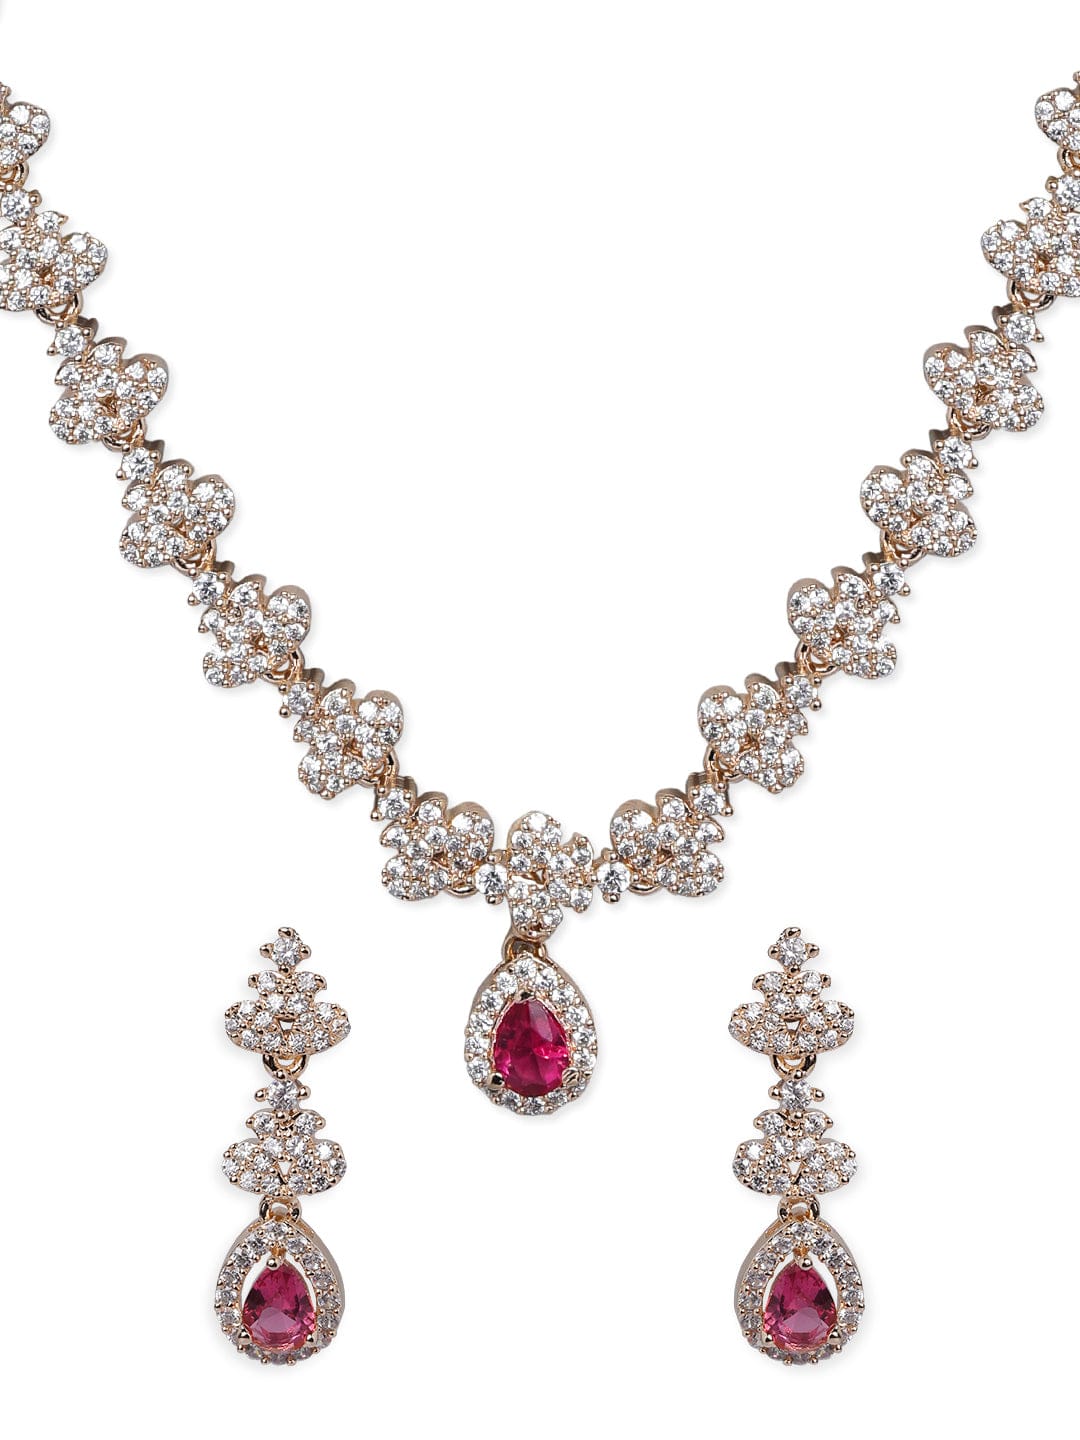 Rubans Rose Gold Plated Necklace Set in CZ and Pink Stones Necklace Set